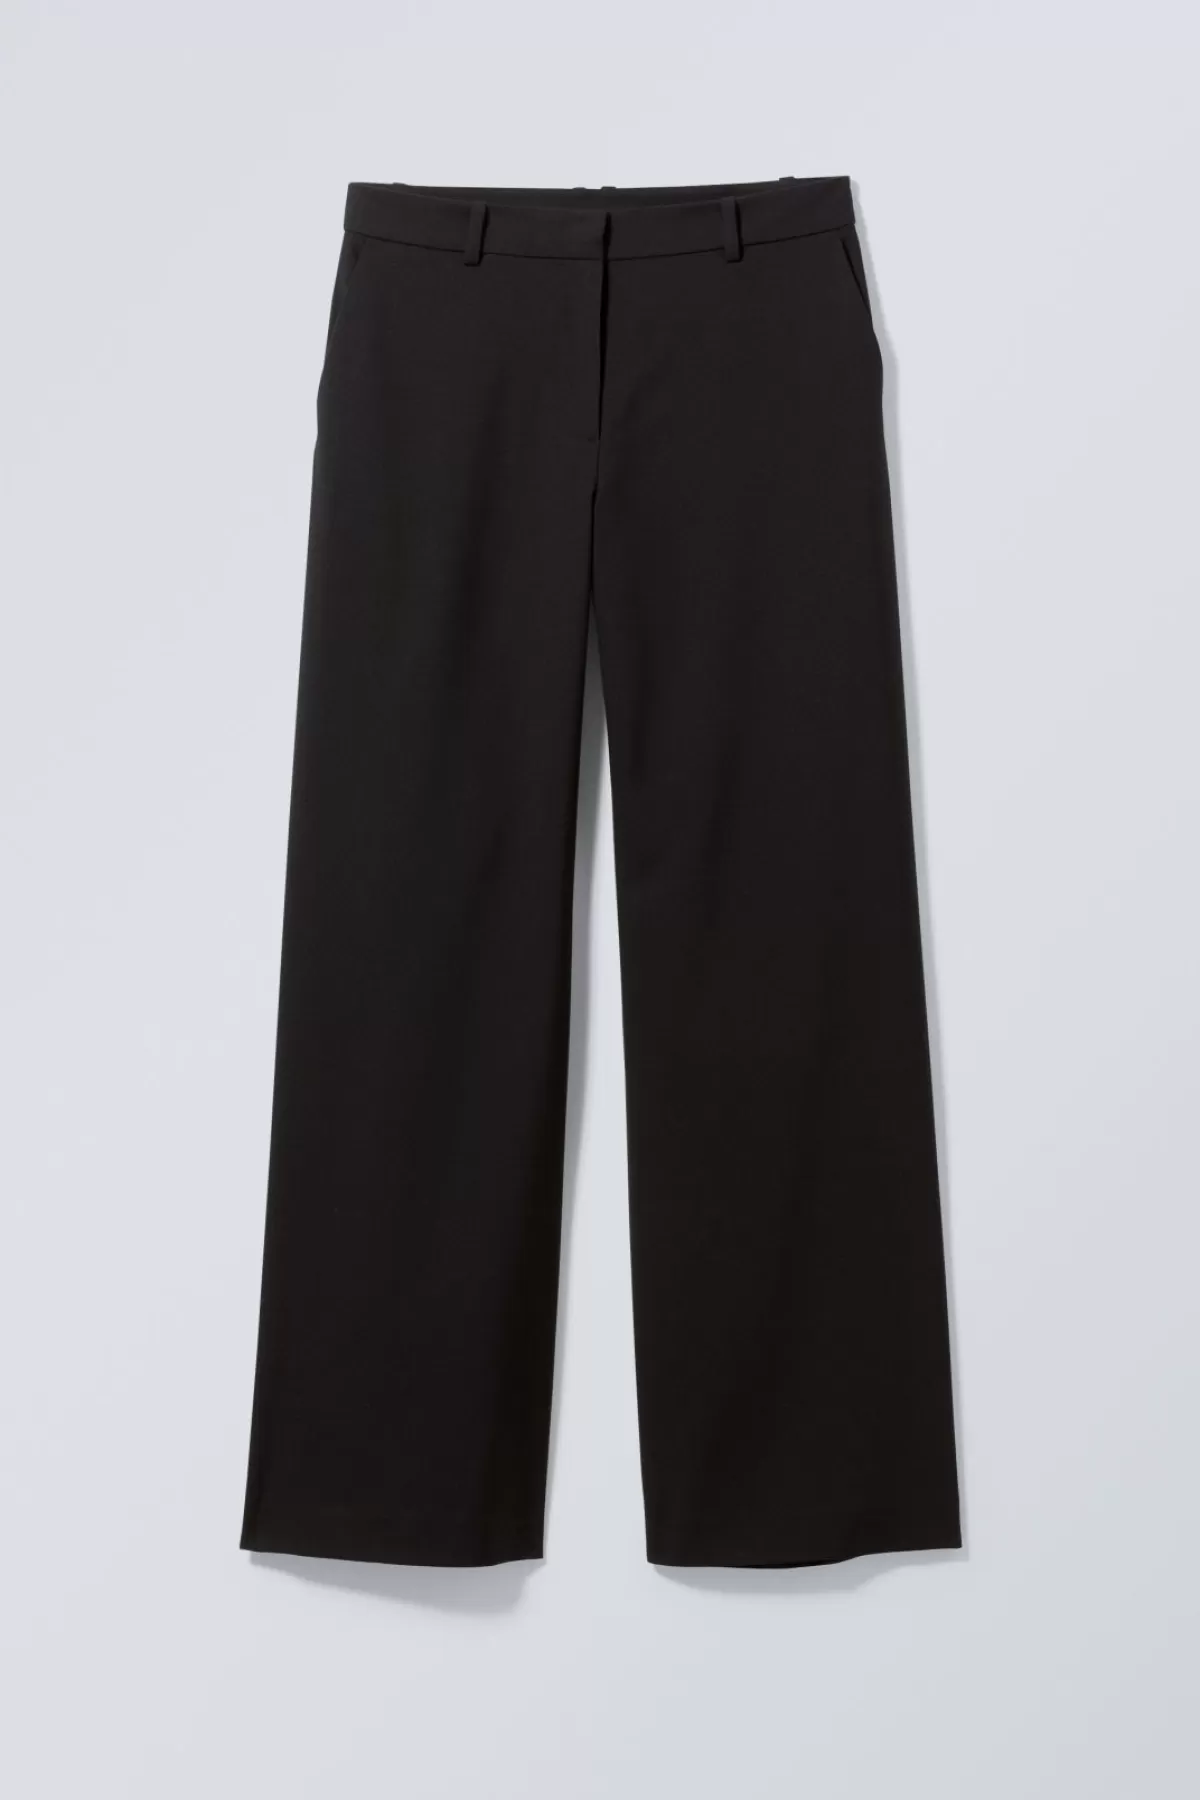 Weekday Emily Low Waist Suiting Trousers Black Store